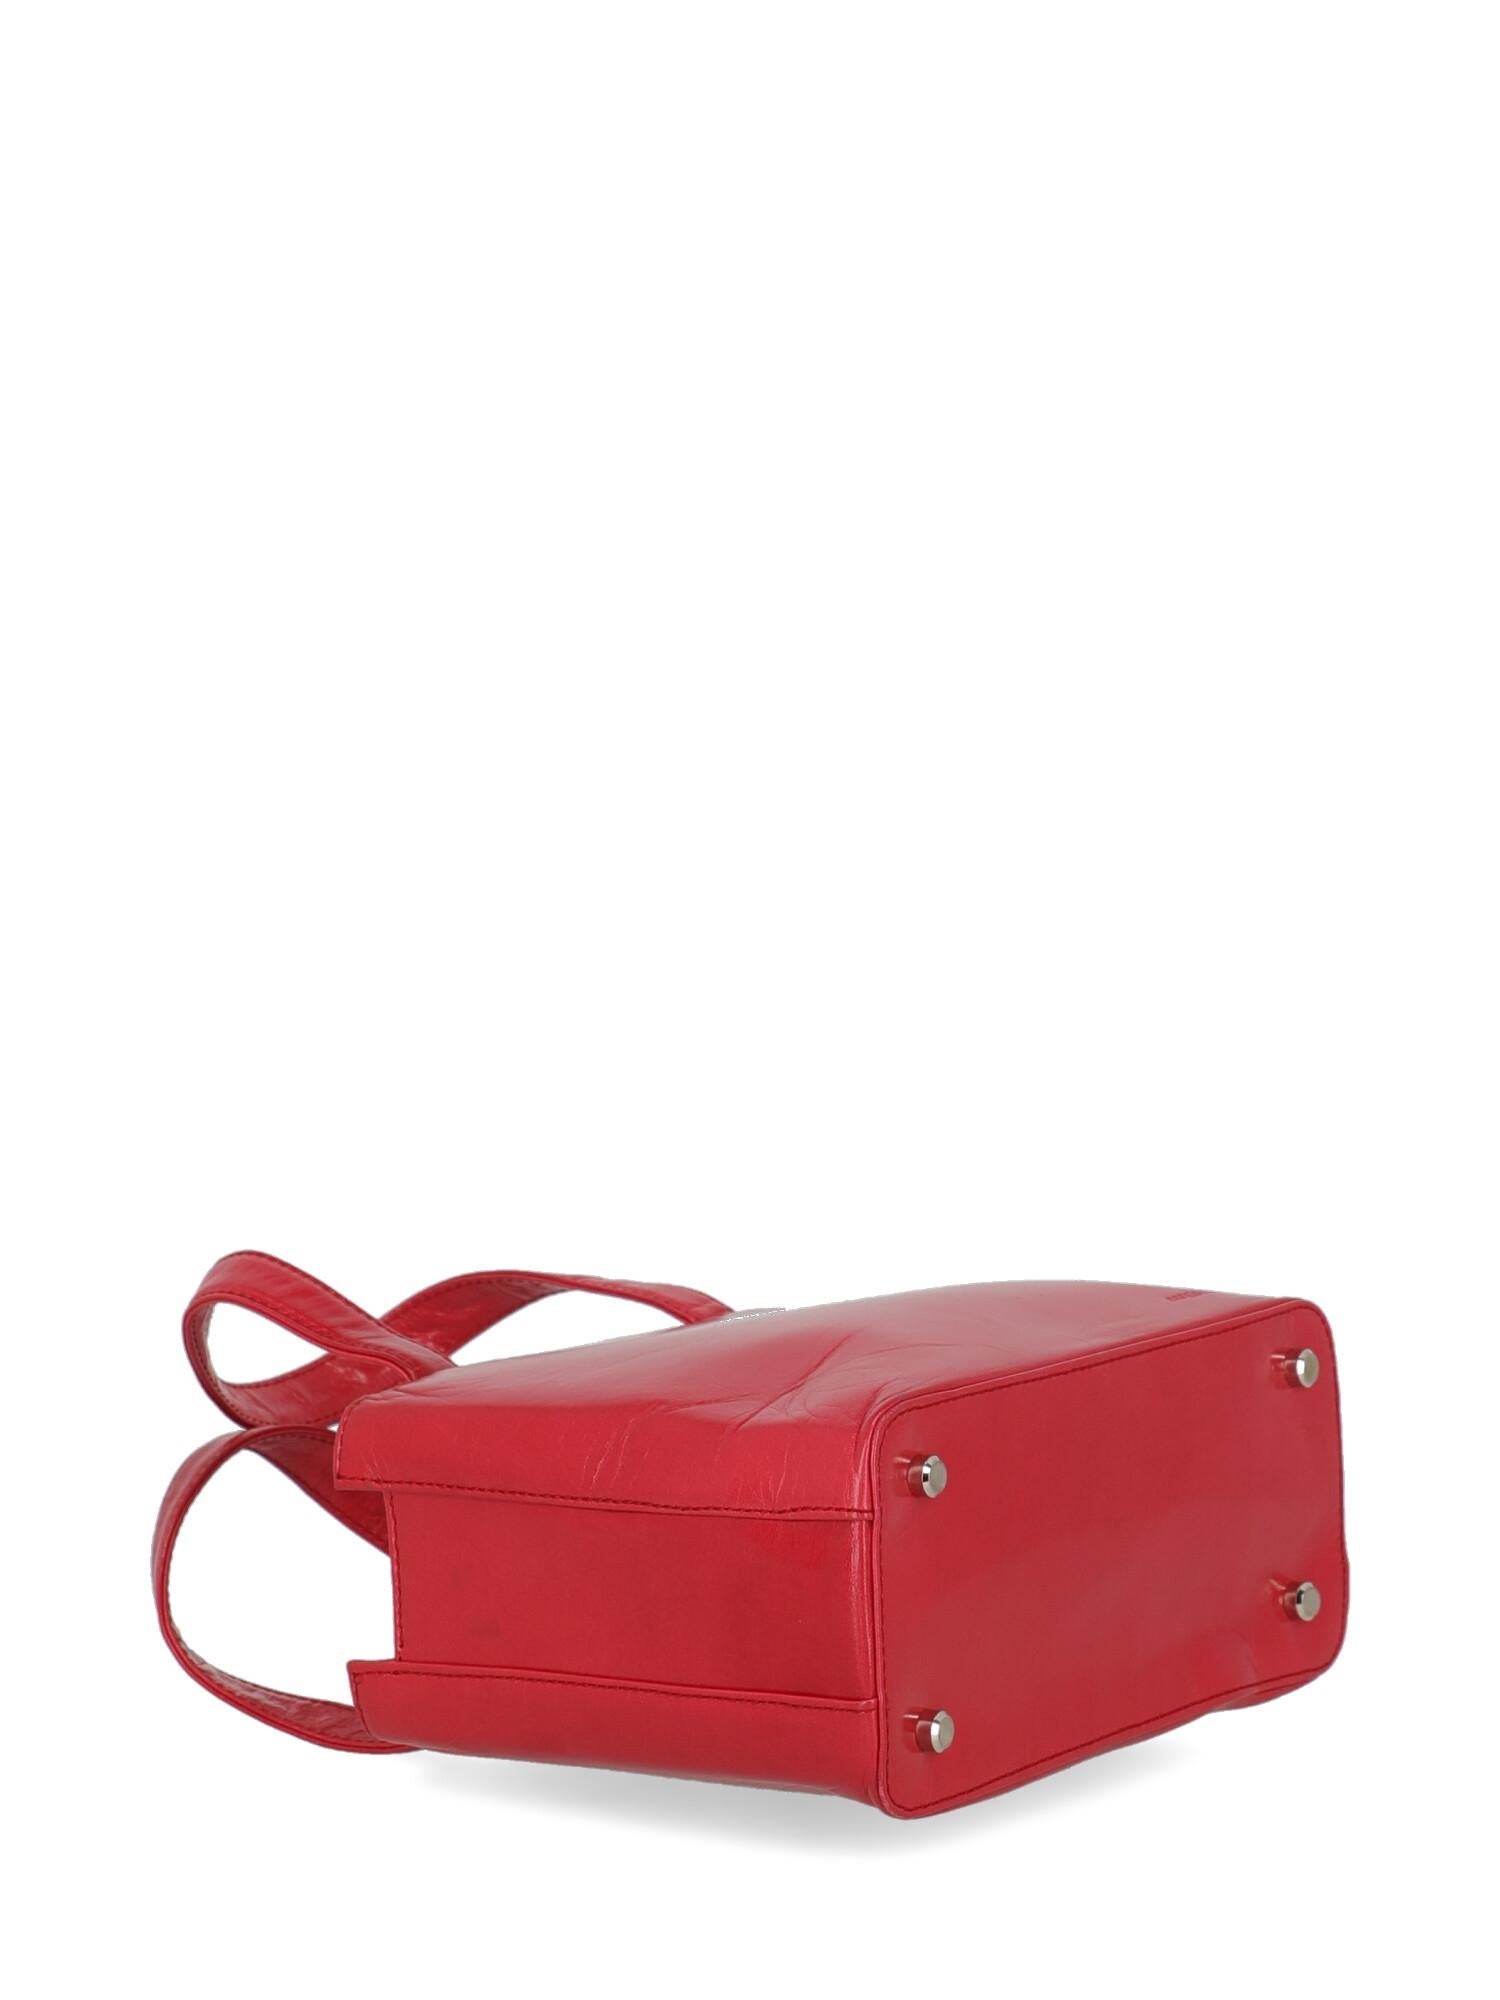 Sergio Rossi Woman Handbag Red Leather In Fair Condition For Sale In Milan, IT